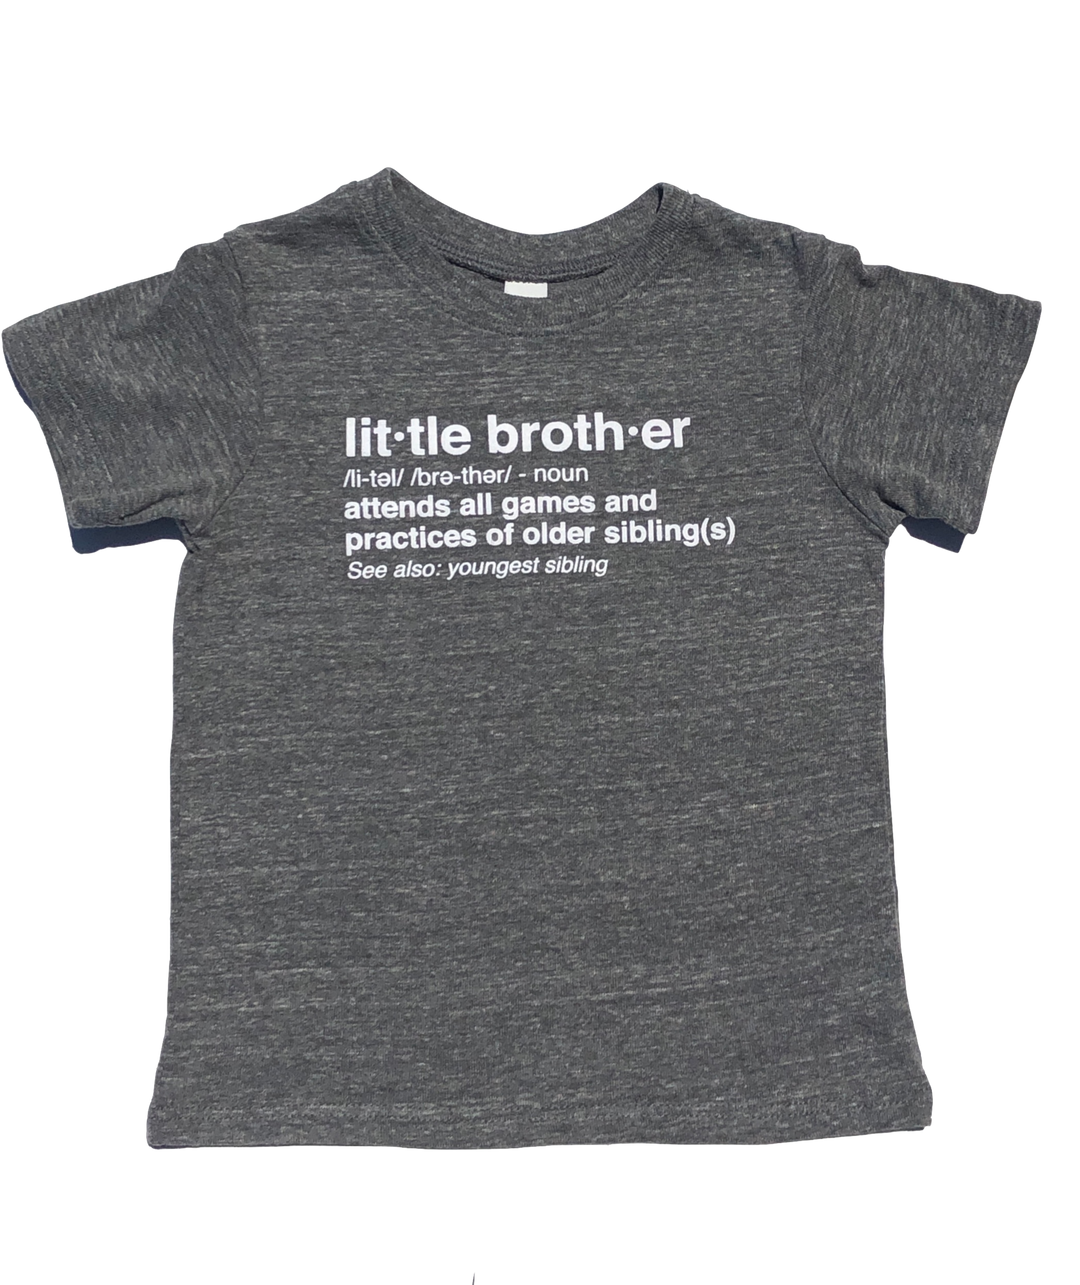 Little Brother definition tee